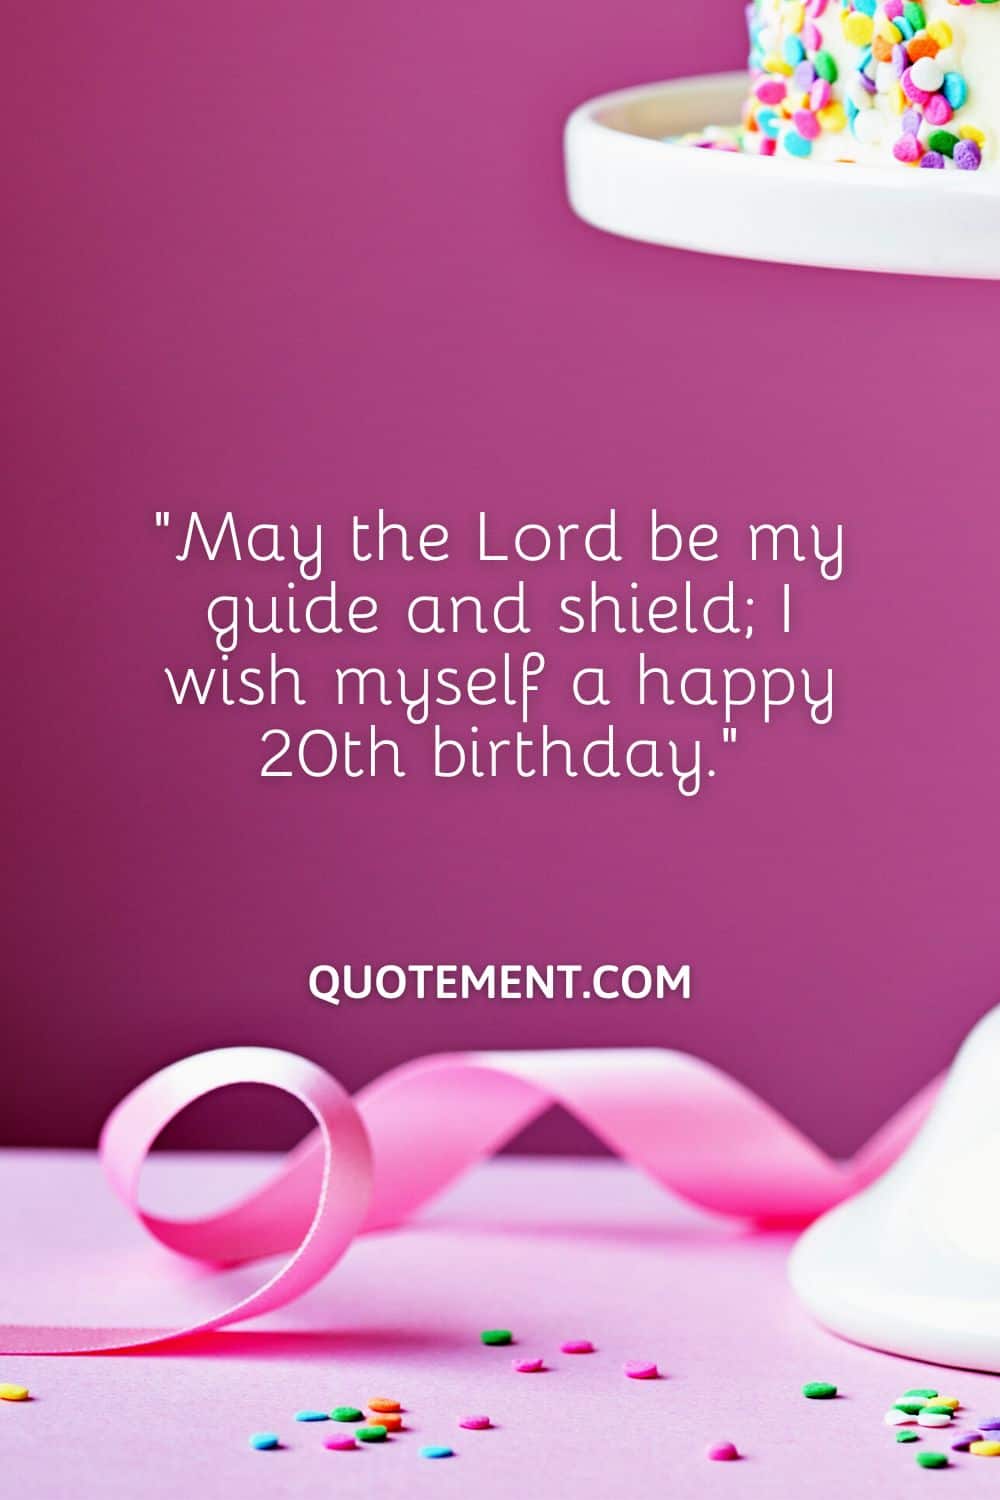 May the Lord be my guide and shield; I wish myself a happy 20th birthday